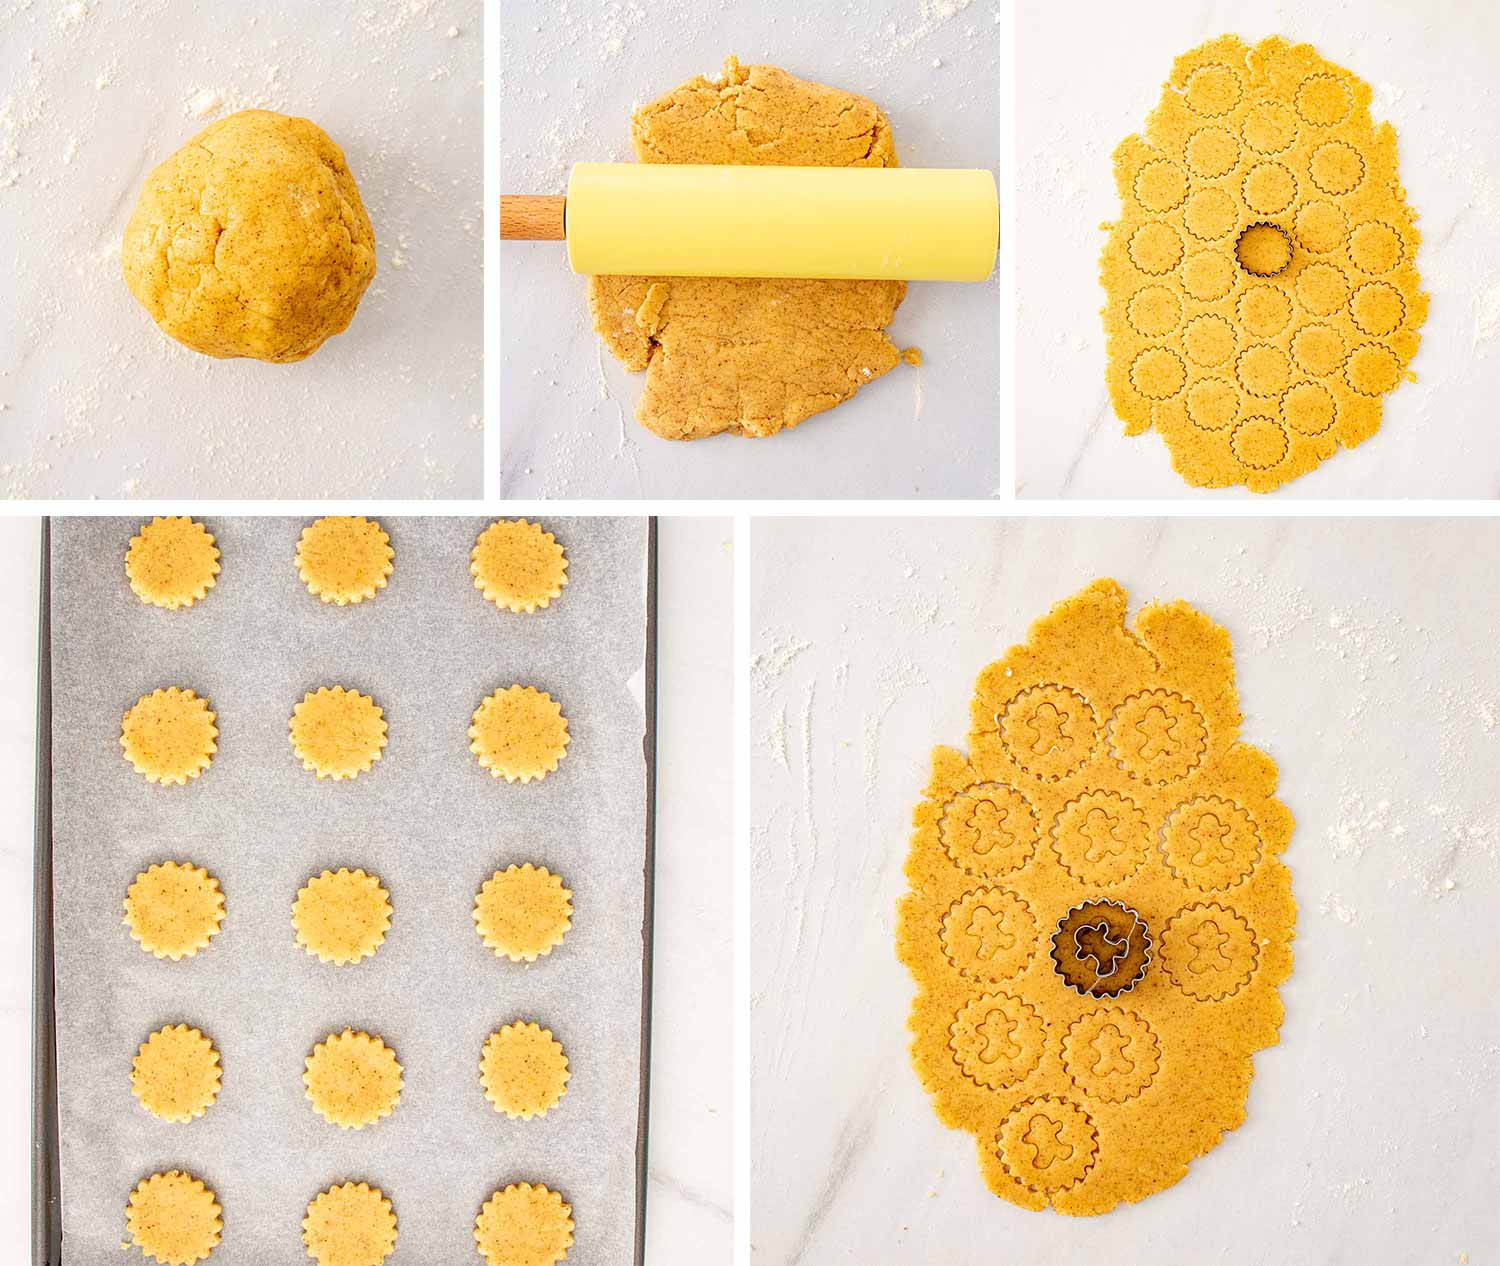 process shots showing how to make linzer cookies.